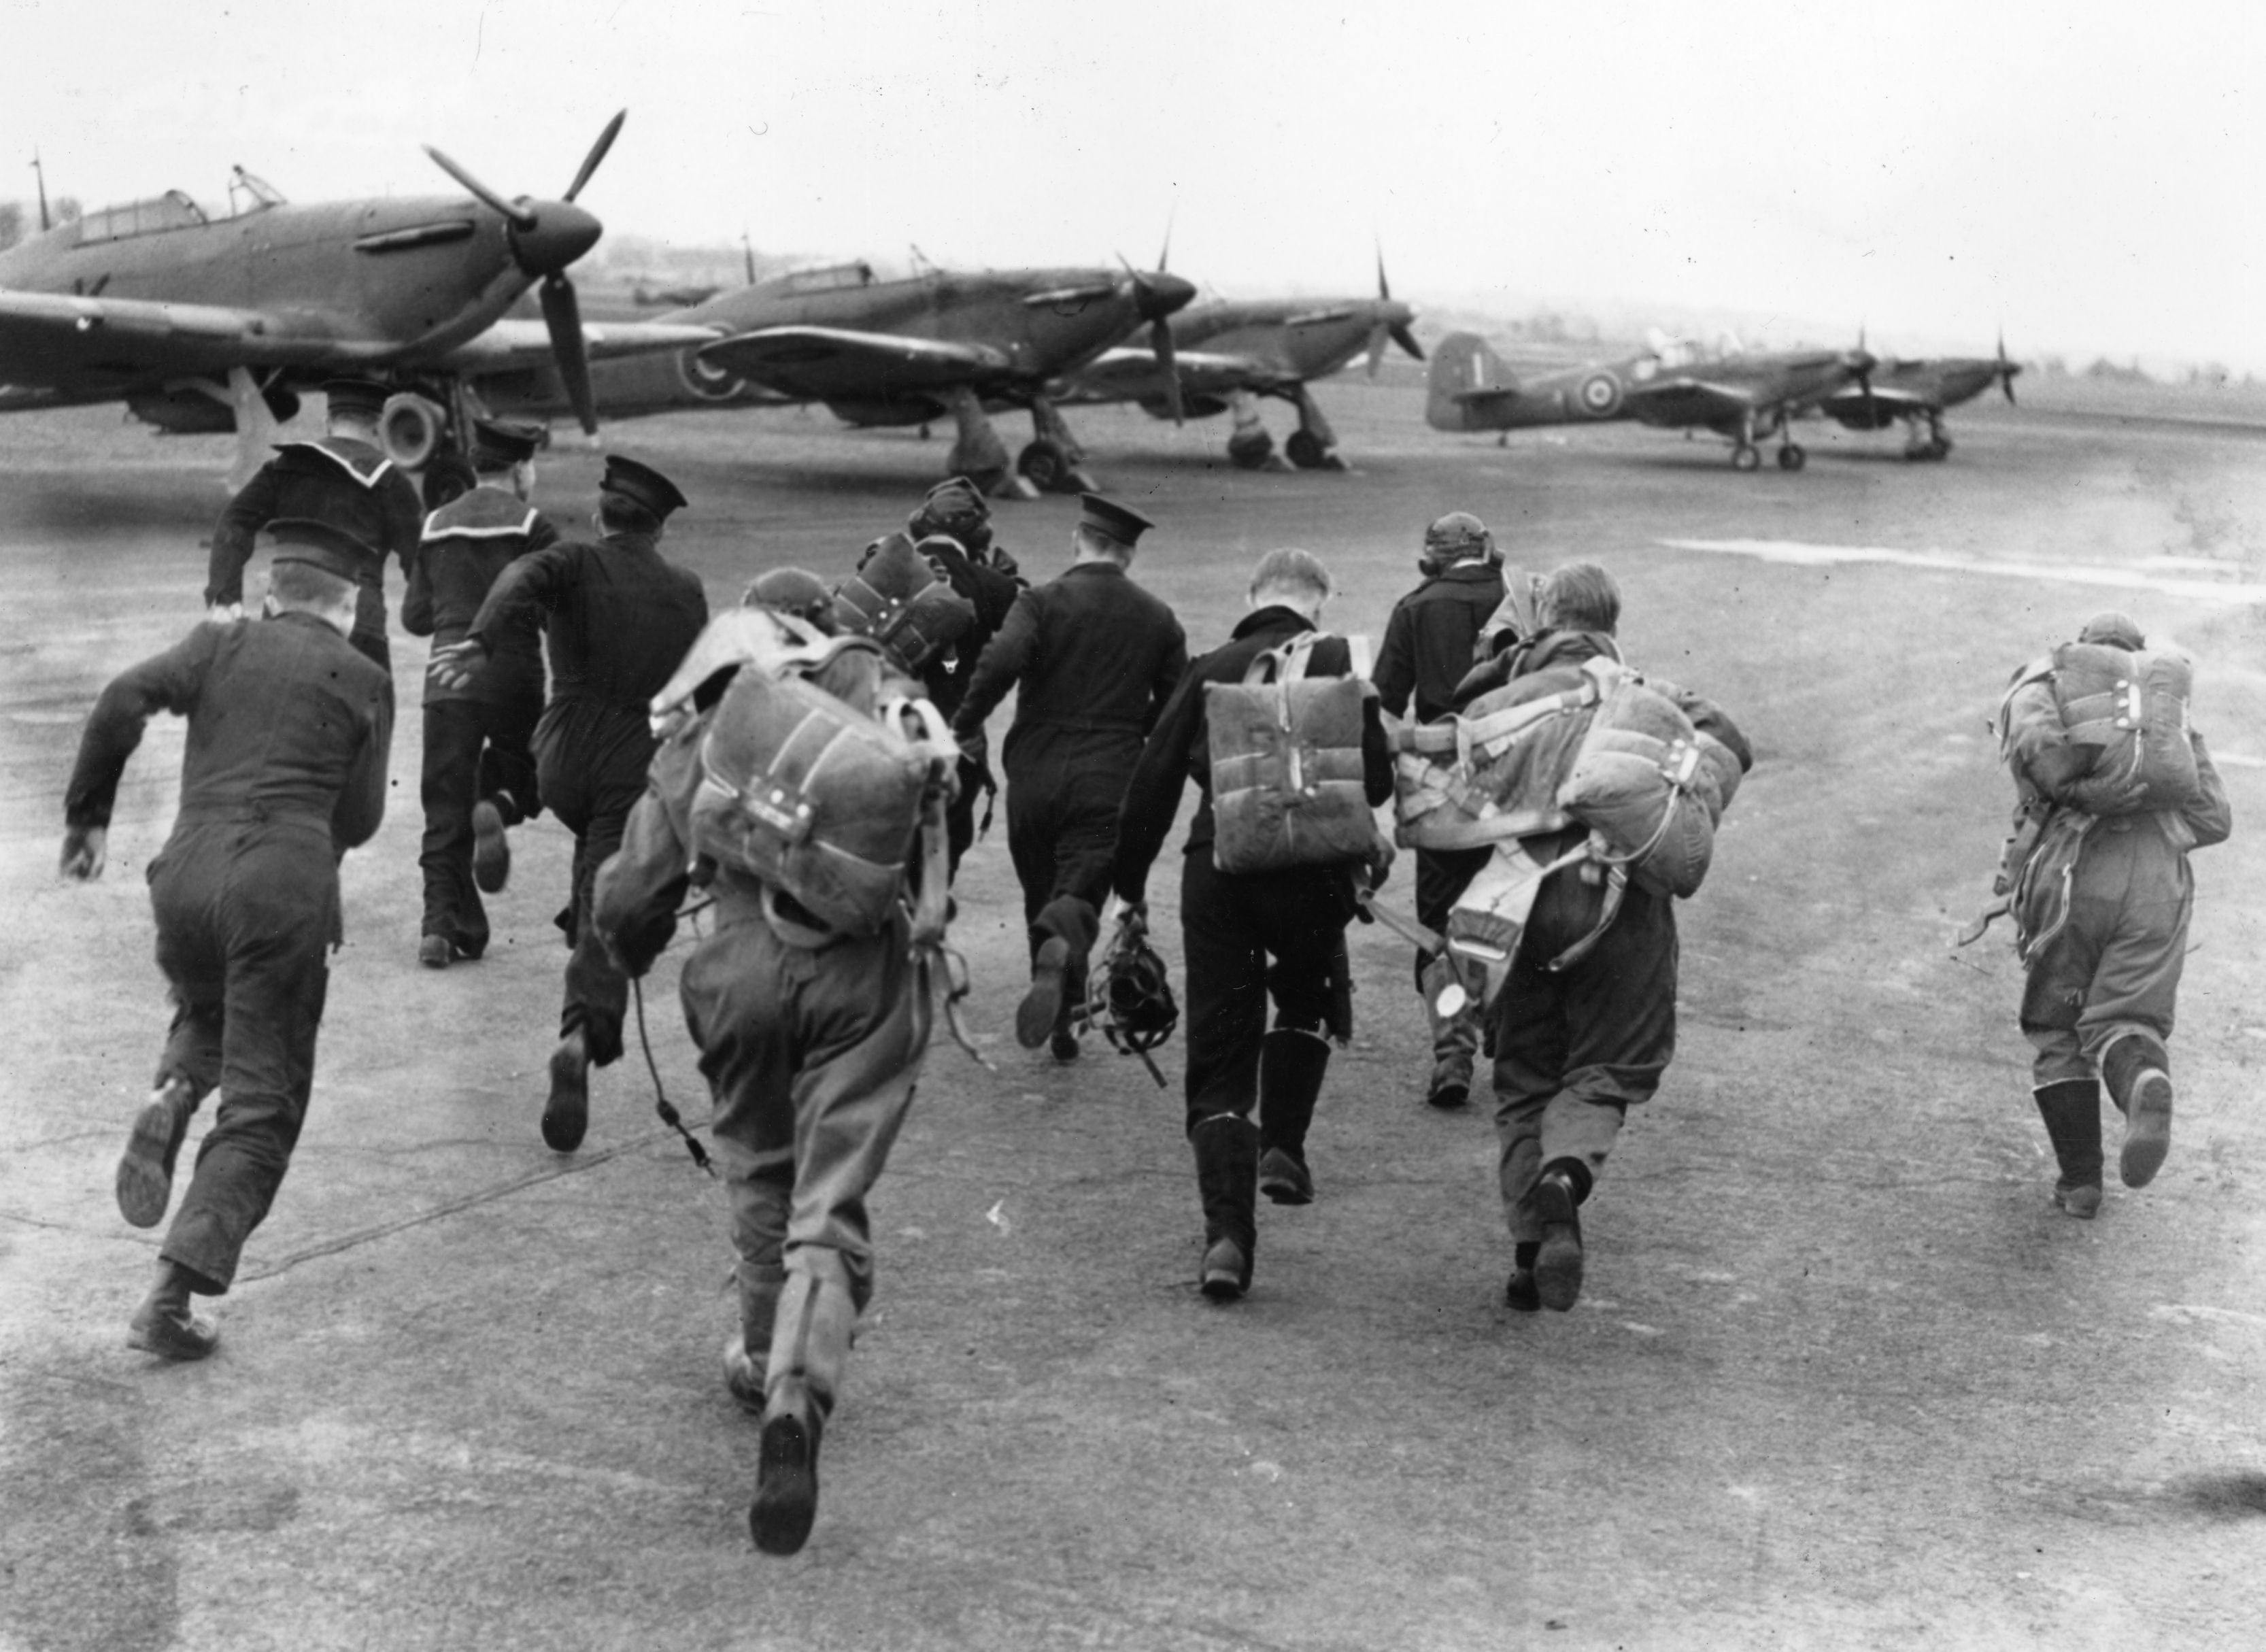 Soldiers scramble for their planes during an alert at a training centre for the Fleet Air Arm